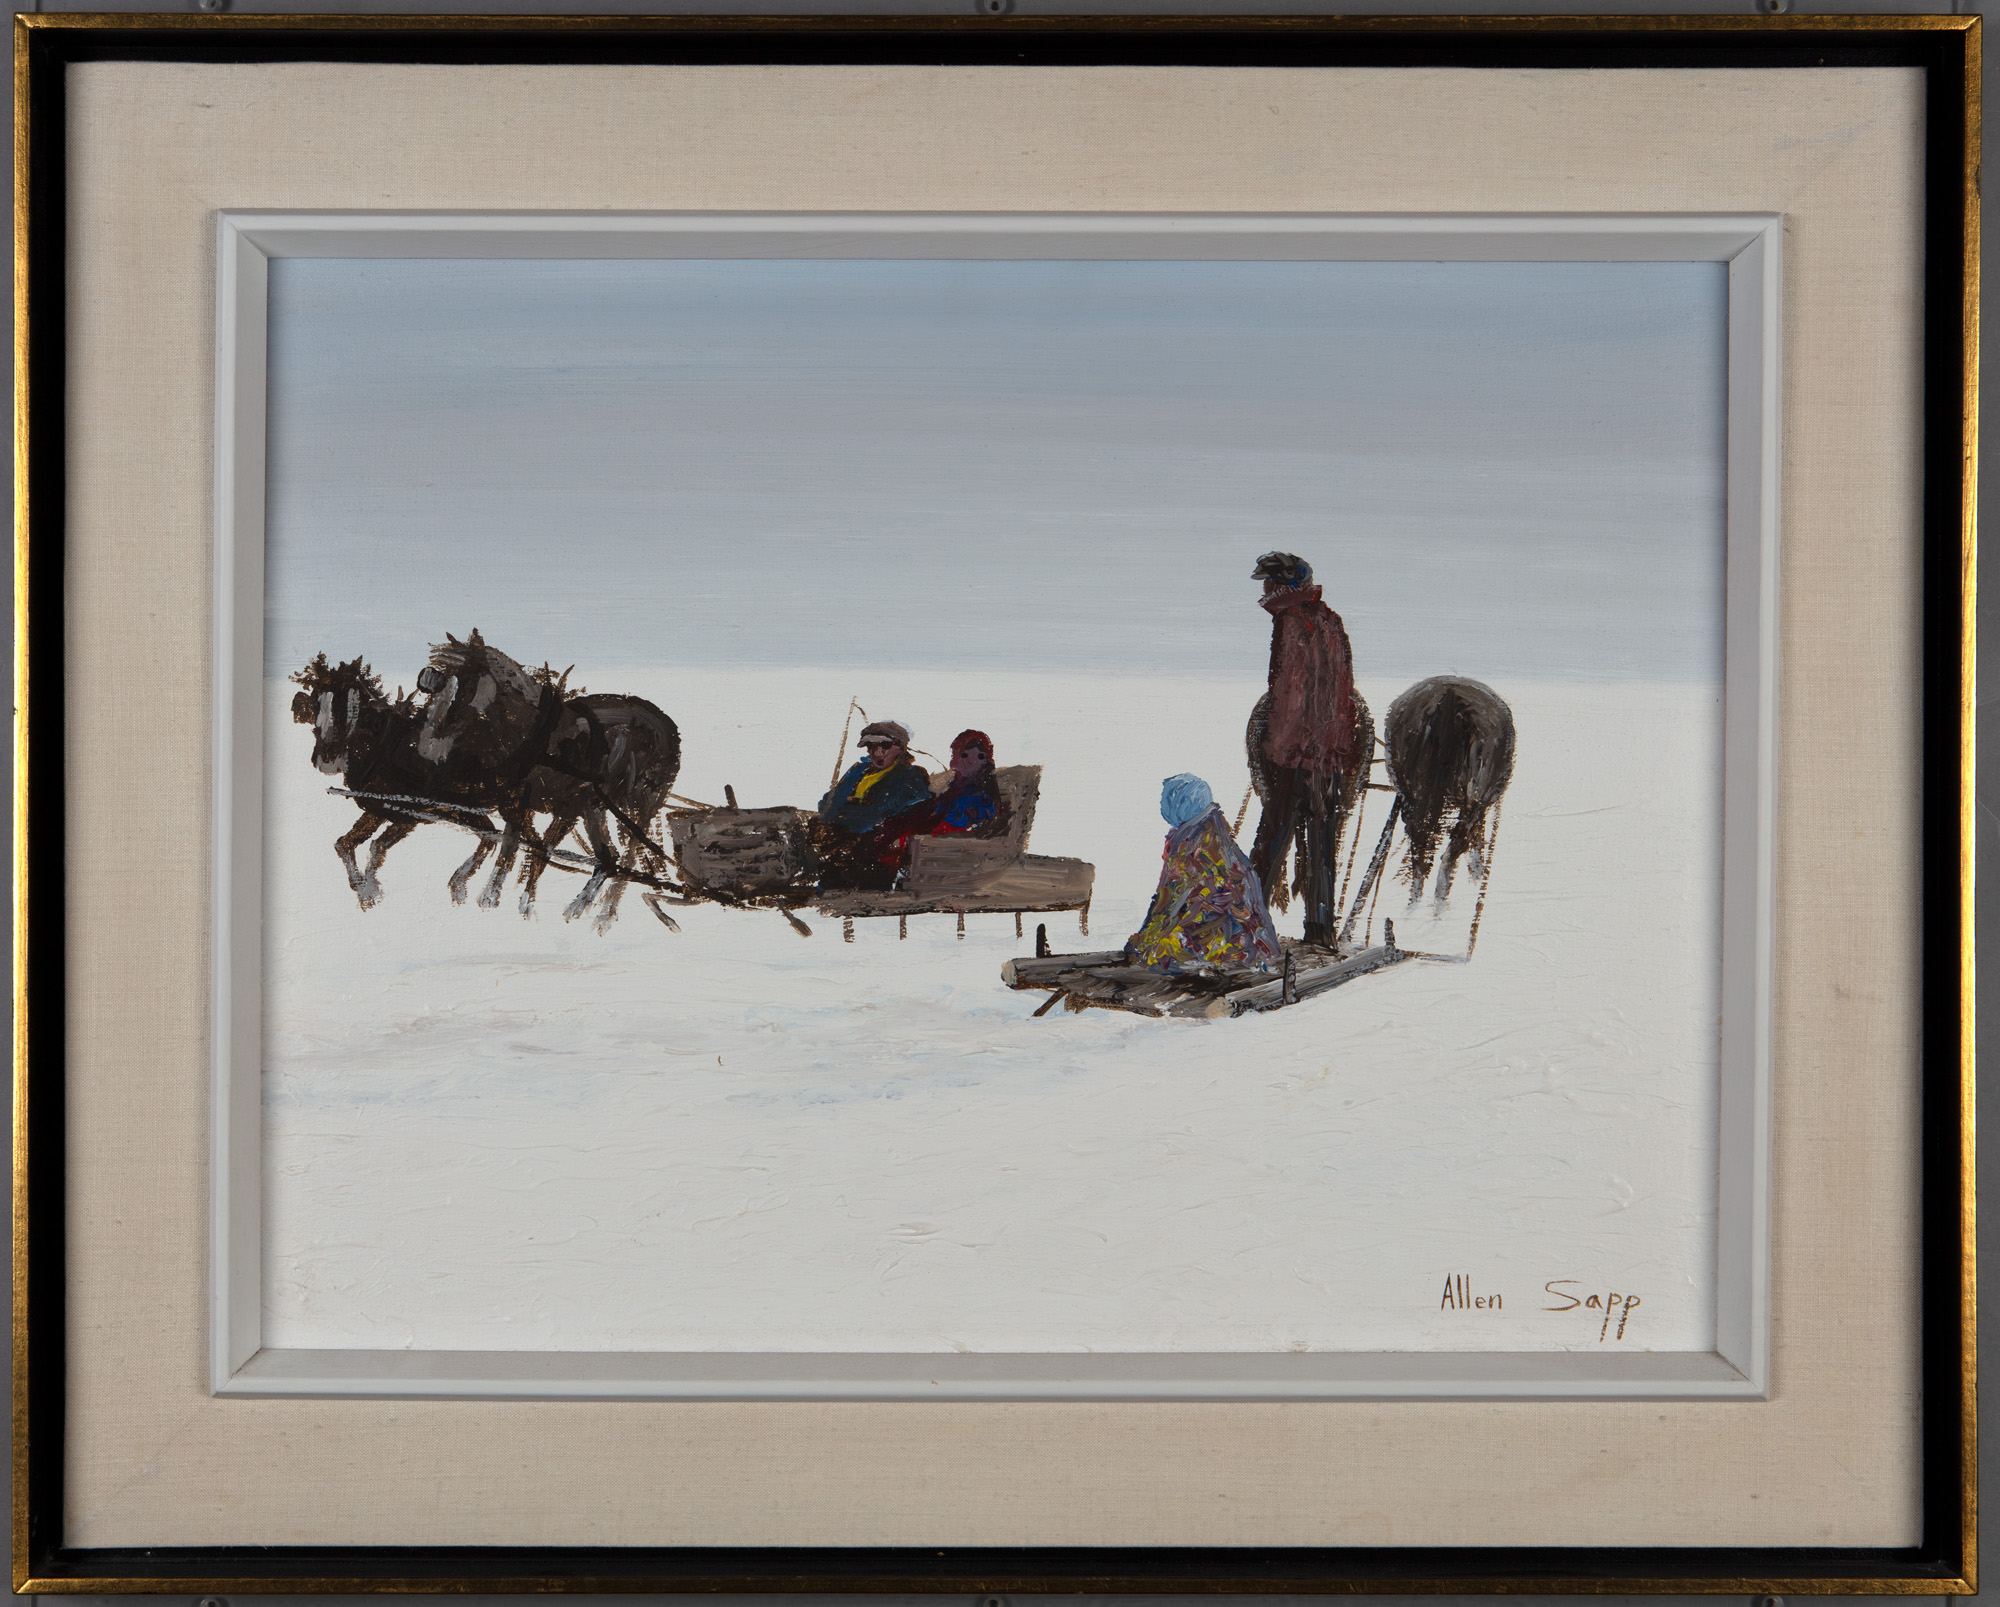 a scene where two couples on horse-drawn sleds meet in a snowy field